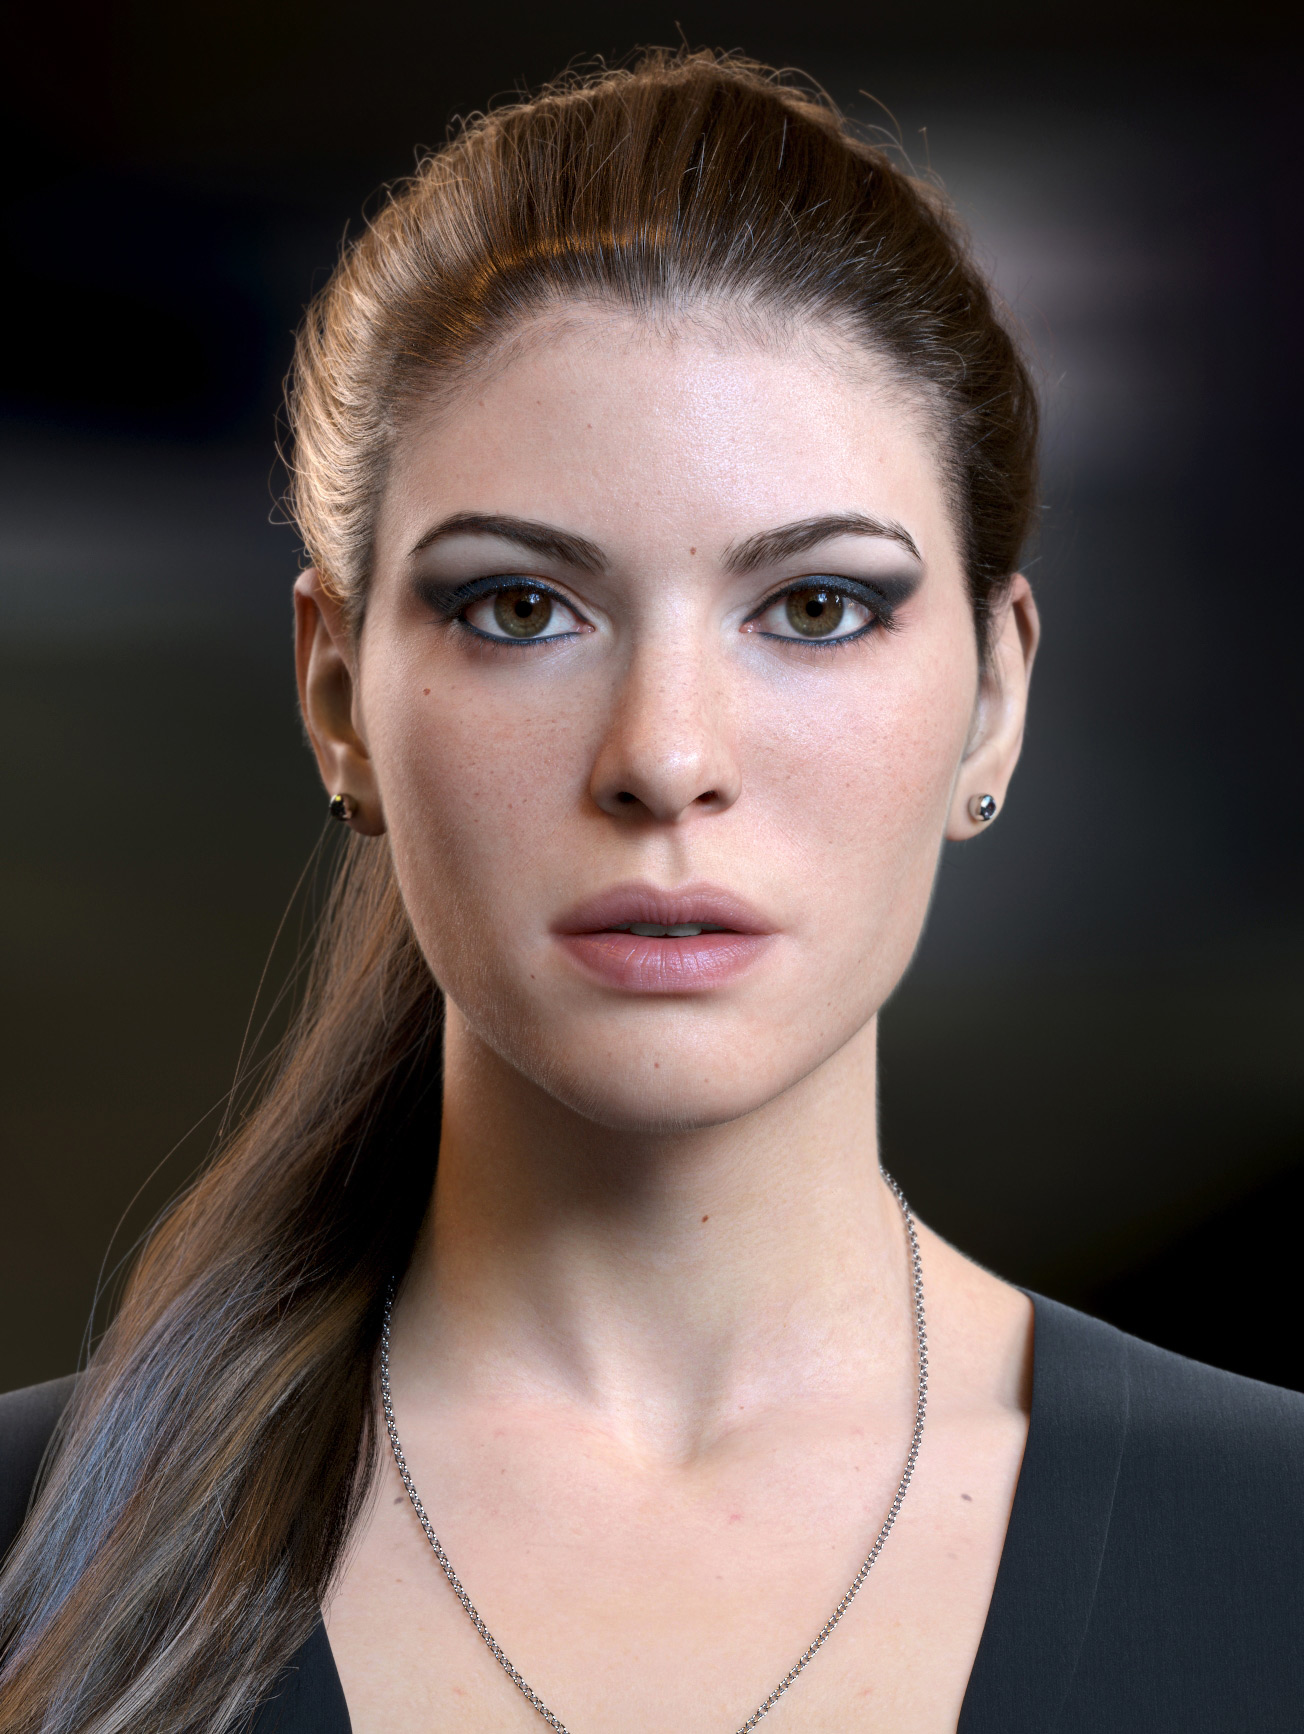 creating a photorealistic female character in zbrush and 3ds max